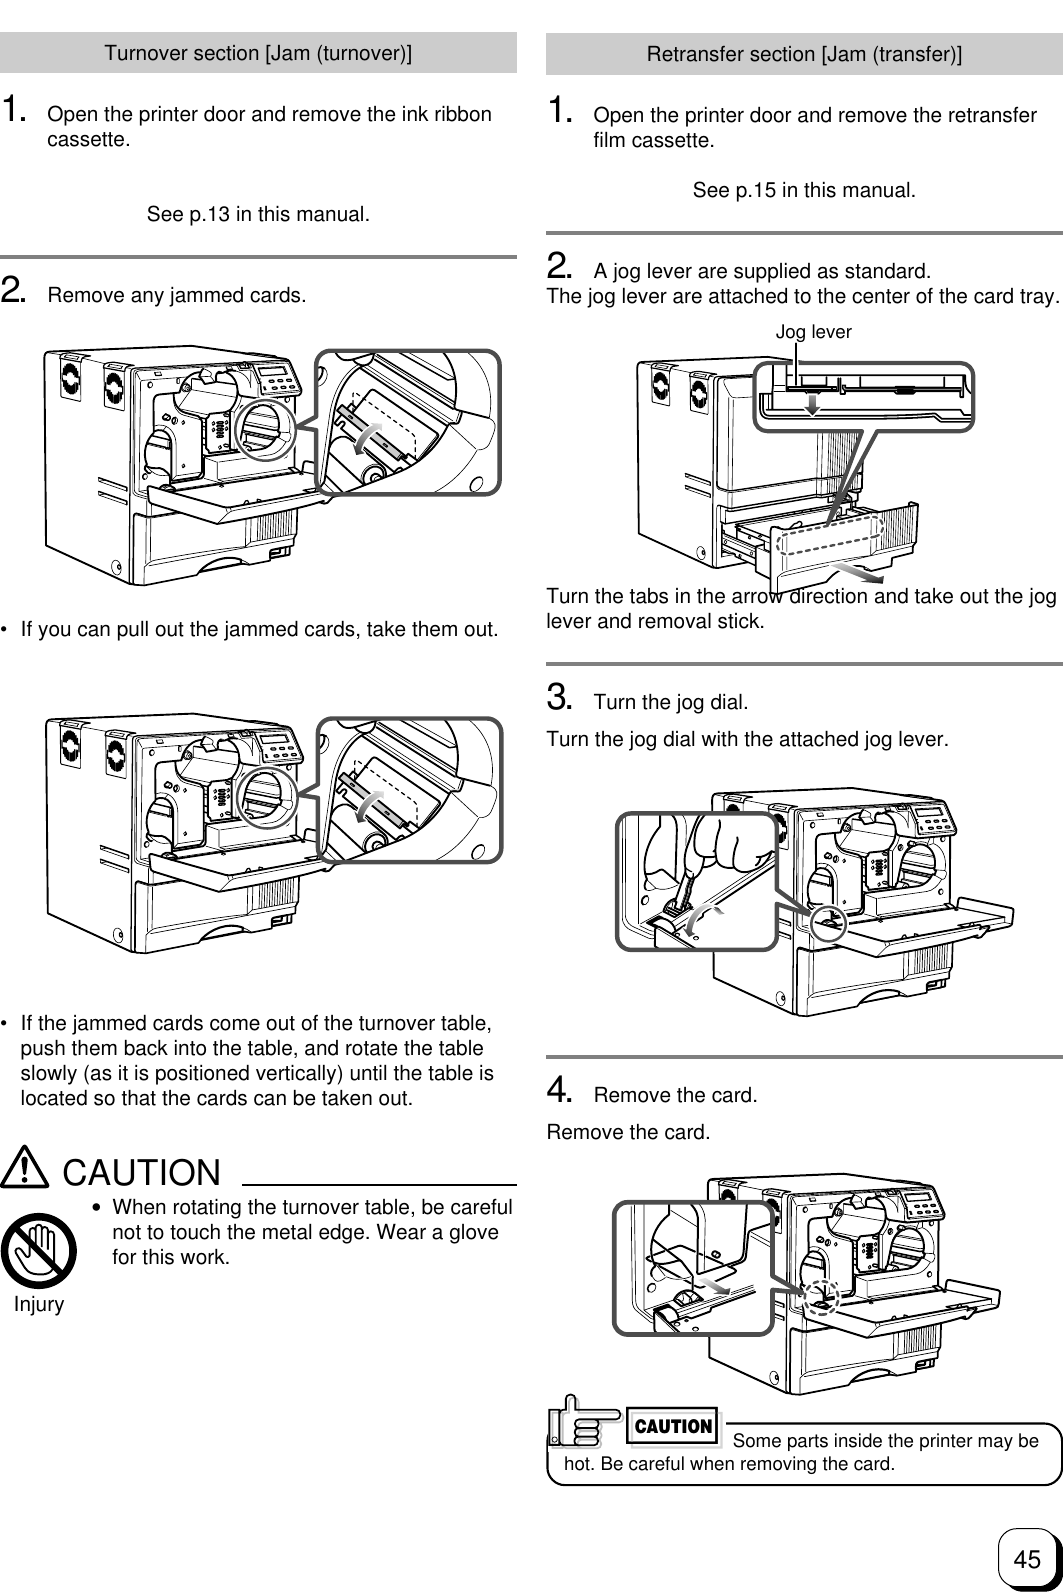 45Turnover section [Jam (turnover)]1. Open the printer door and remove the ink ribboncassette.See p.13 in this manual.2. Remove any jammed cards.Retransfer section [Jam (transfer)]1. Open the printer door and remove the retransferfilm cassette.See p.15 in this manual.2. A jog lever are supplied as standard.The jog lever are attached to the center of the card tray.Turn the tabs in the arrow direction and take out the joglever and removal stick.3. Turn the jog dial.Turn the jog dial with the attached jog lever.4. Remove the card.Remove the card. Some parts inside the printer may behot. Be careful when removing the card.CAUTION• If the jammed cards come out of the turnover table,push them back into the table, and rotate the tableslowly (as it is positioned vertically) until the table islocated so that the cards can be taken out.CAUTION•When rotating the turnover table, be carefulnot to touch the metal edge. Wear a glovefor this work.Injury• If you can pull out the jammed cards, take them out.Jog lever